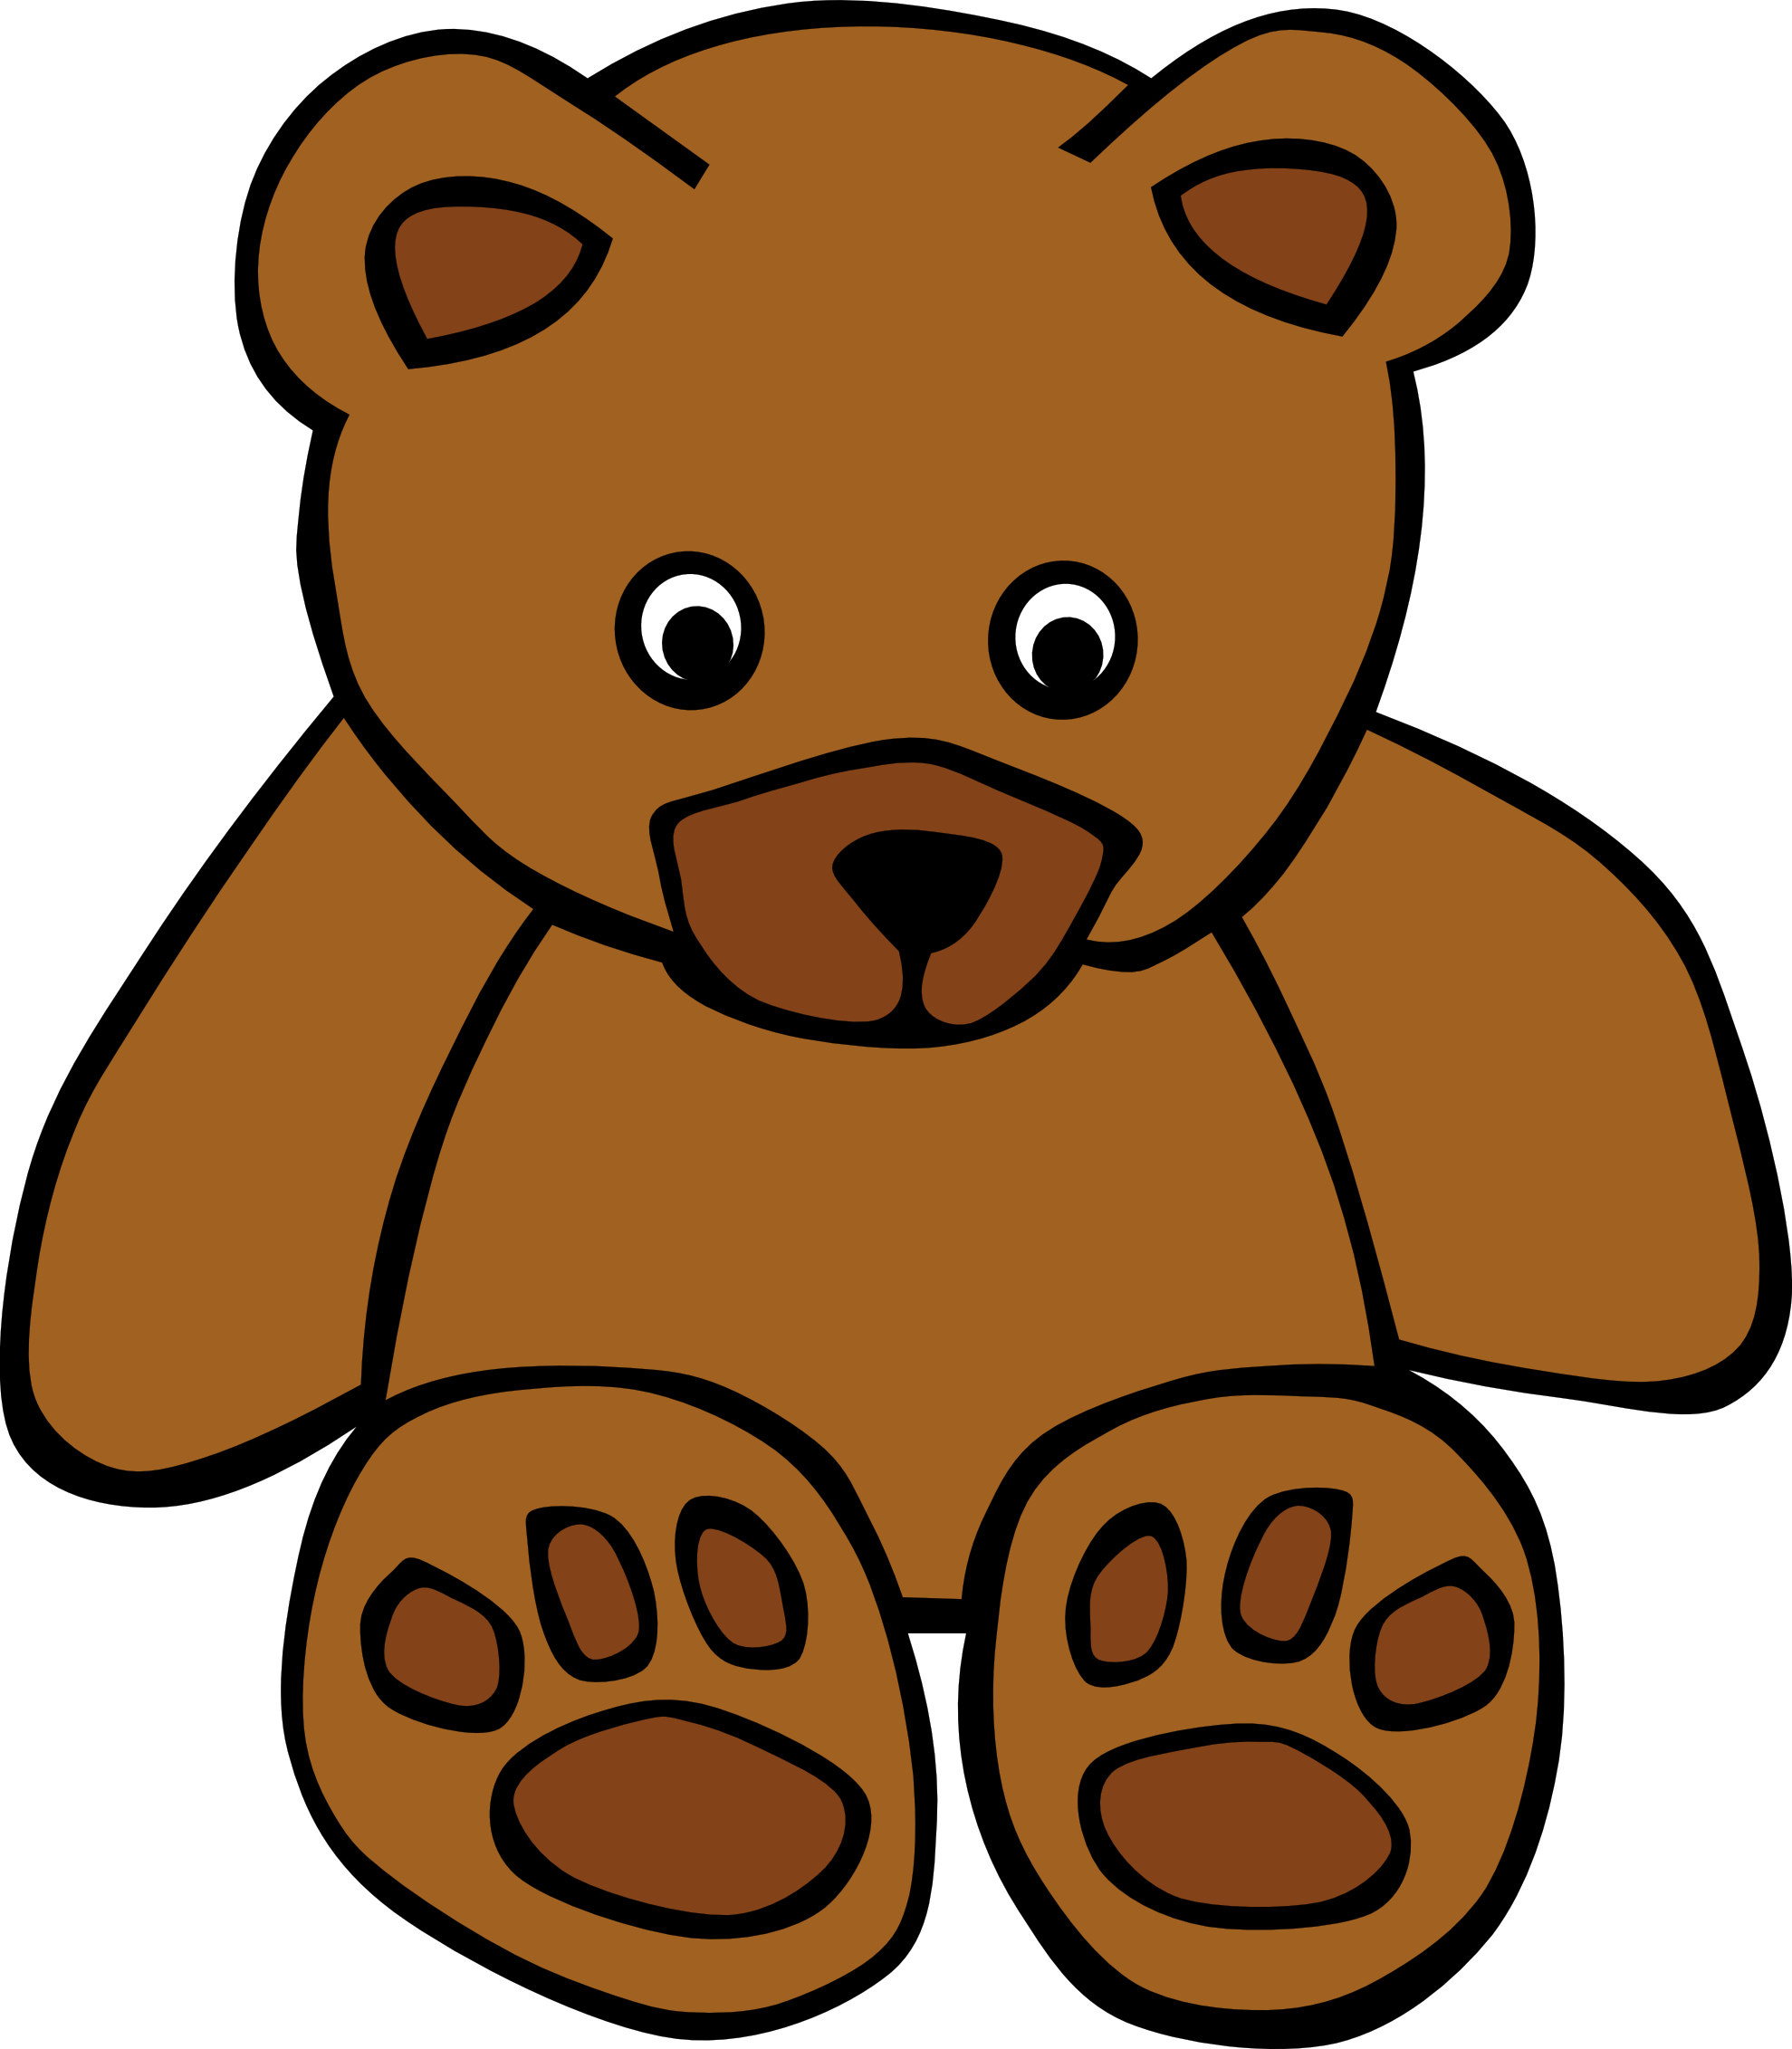 Stuffed animal on bed clipart